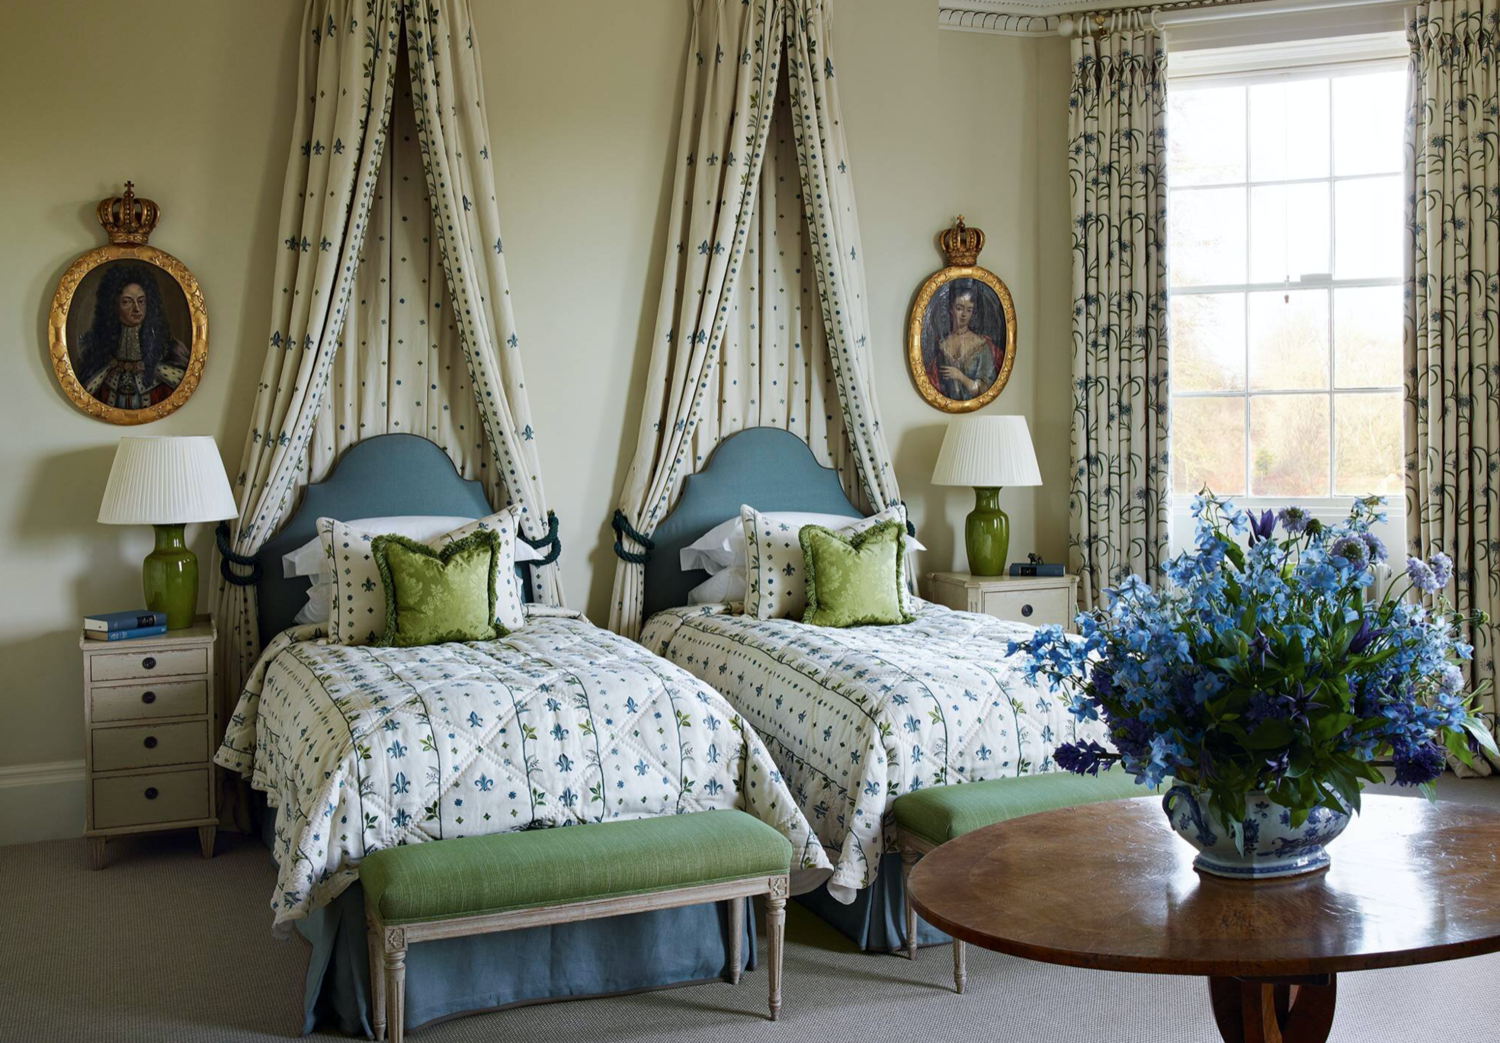 A bedroom at Pusey House, the home of Chelsea Textiles founder Mona Perlhagen. Photo by Simon Upton